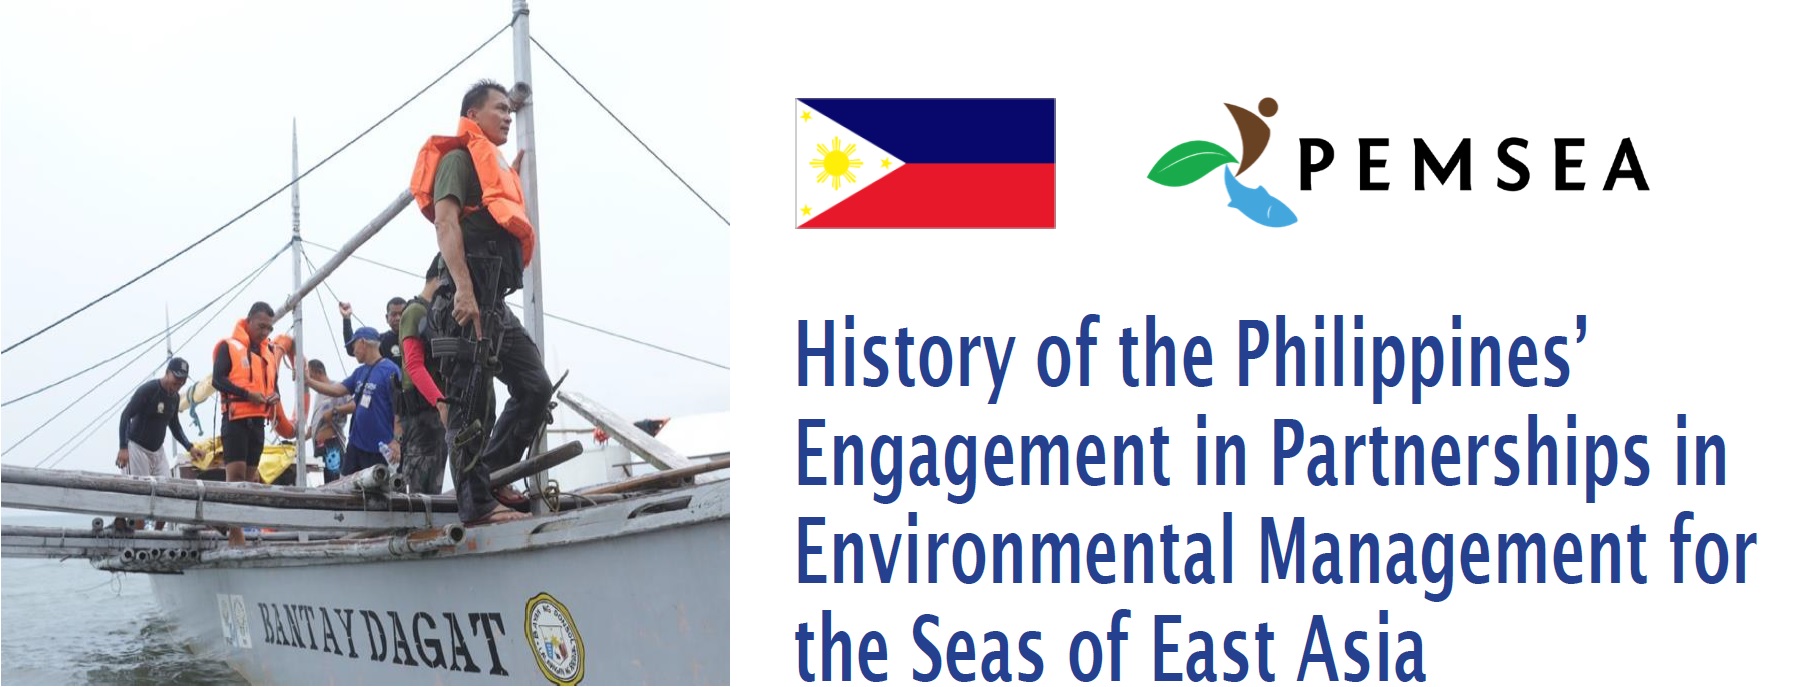 History of the Philippines’ Engagement in PEMSEA